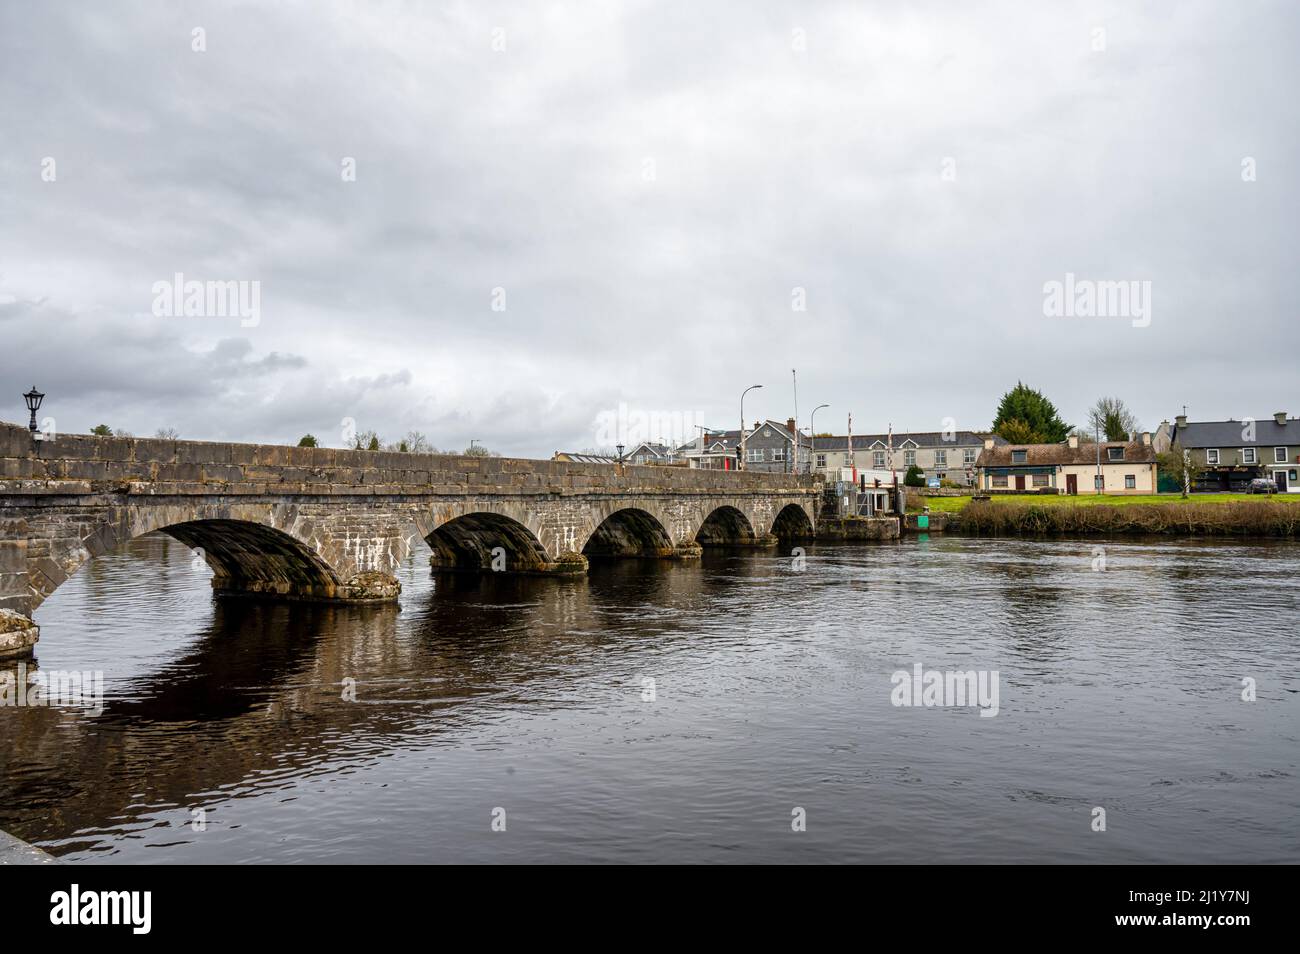 Rooskey, Ireland: March 17, 2022: Rooskey stone bridge over the River Shannon in Ireland Stock Photo